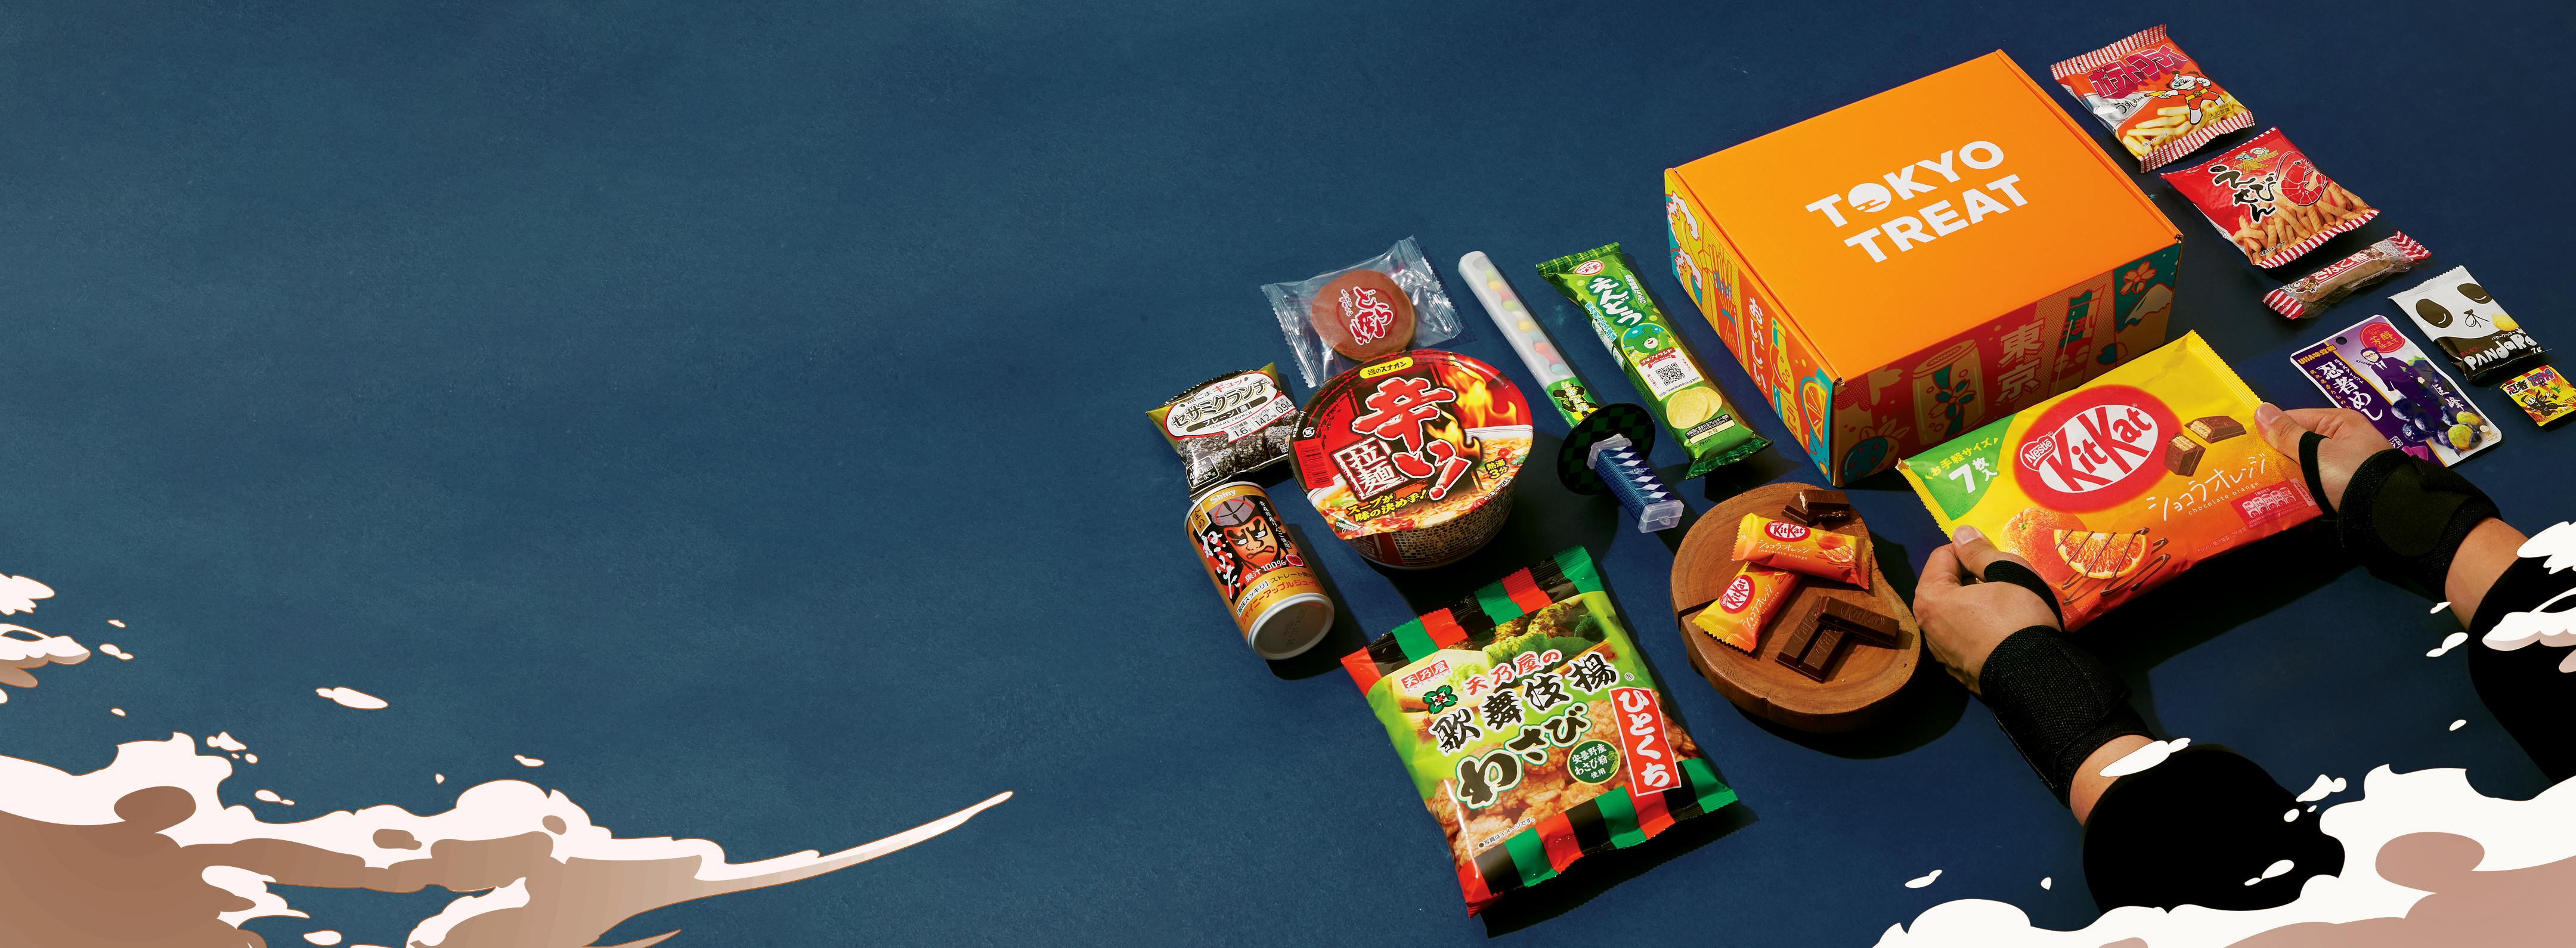 The TokyoTreat box sits on a blue background, surrounded by box items and ninja-inspired motifs.